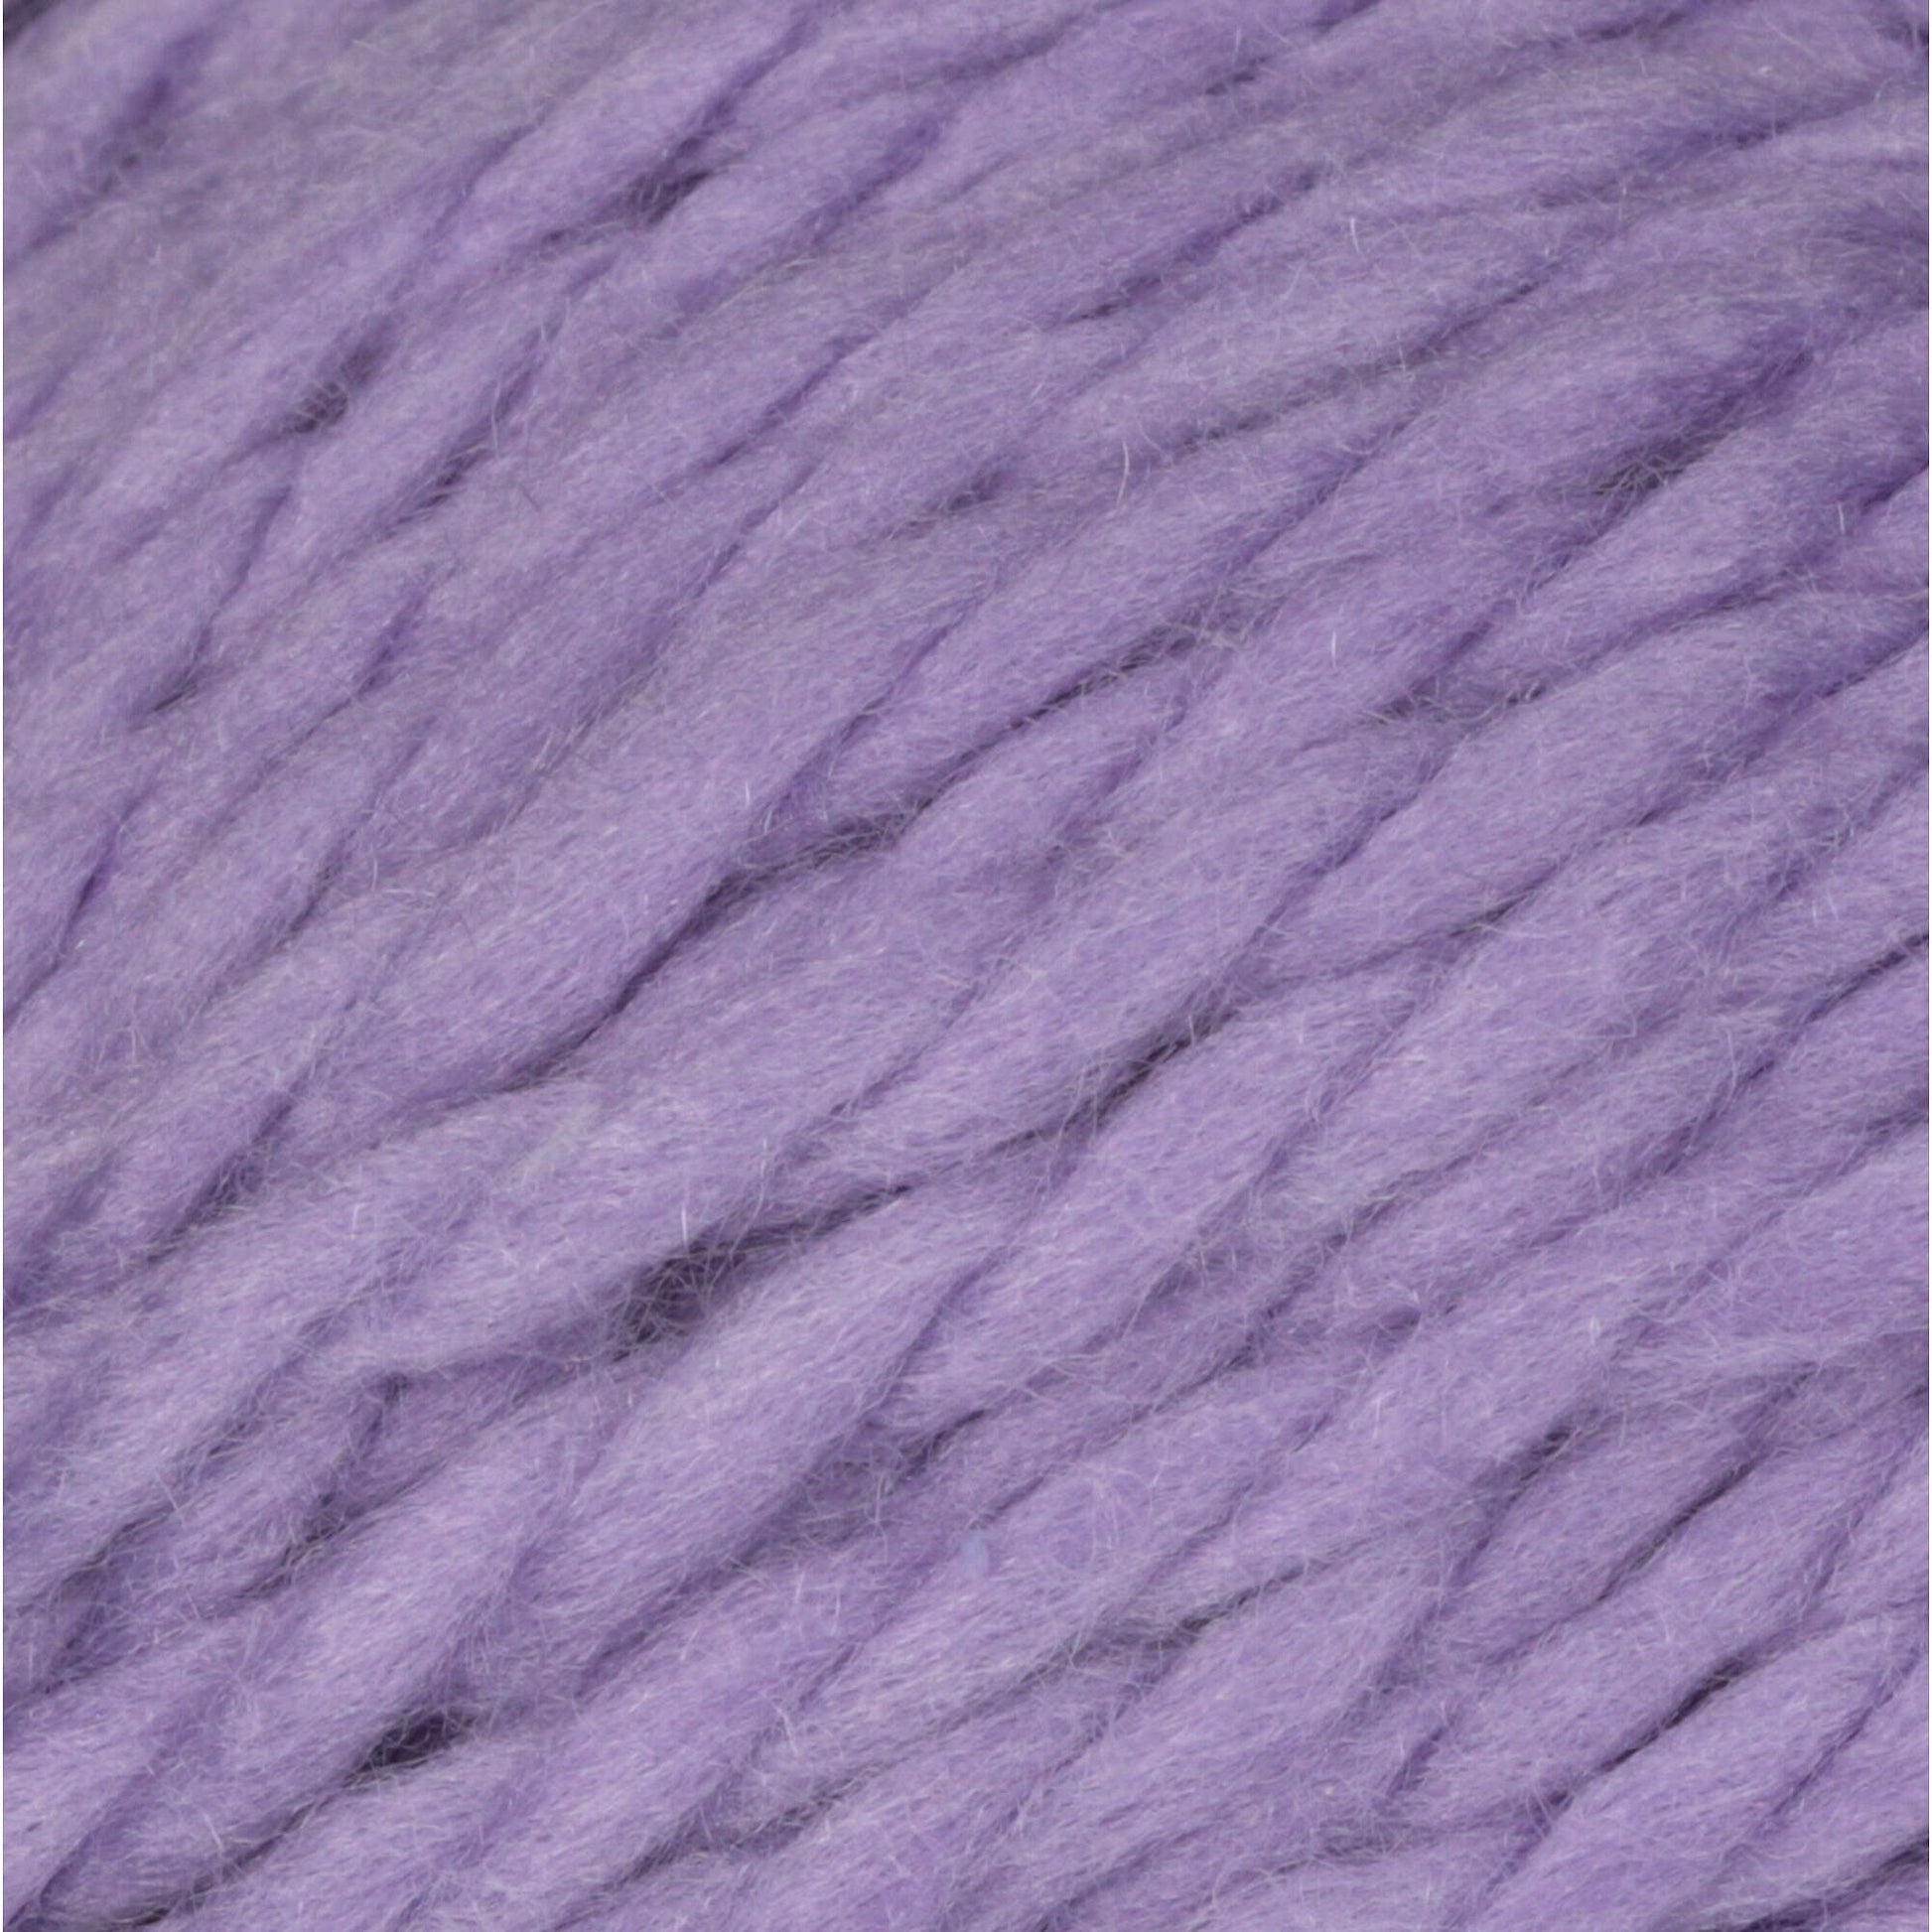 Patons Beehive Baby Chunky Yarn - Discontinued Shades Vaster Violet